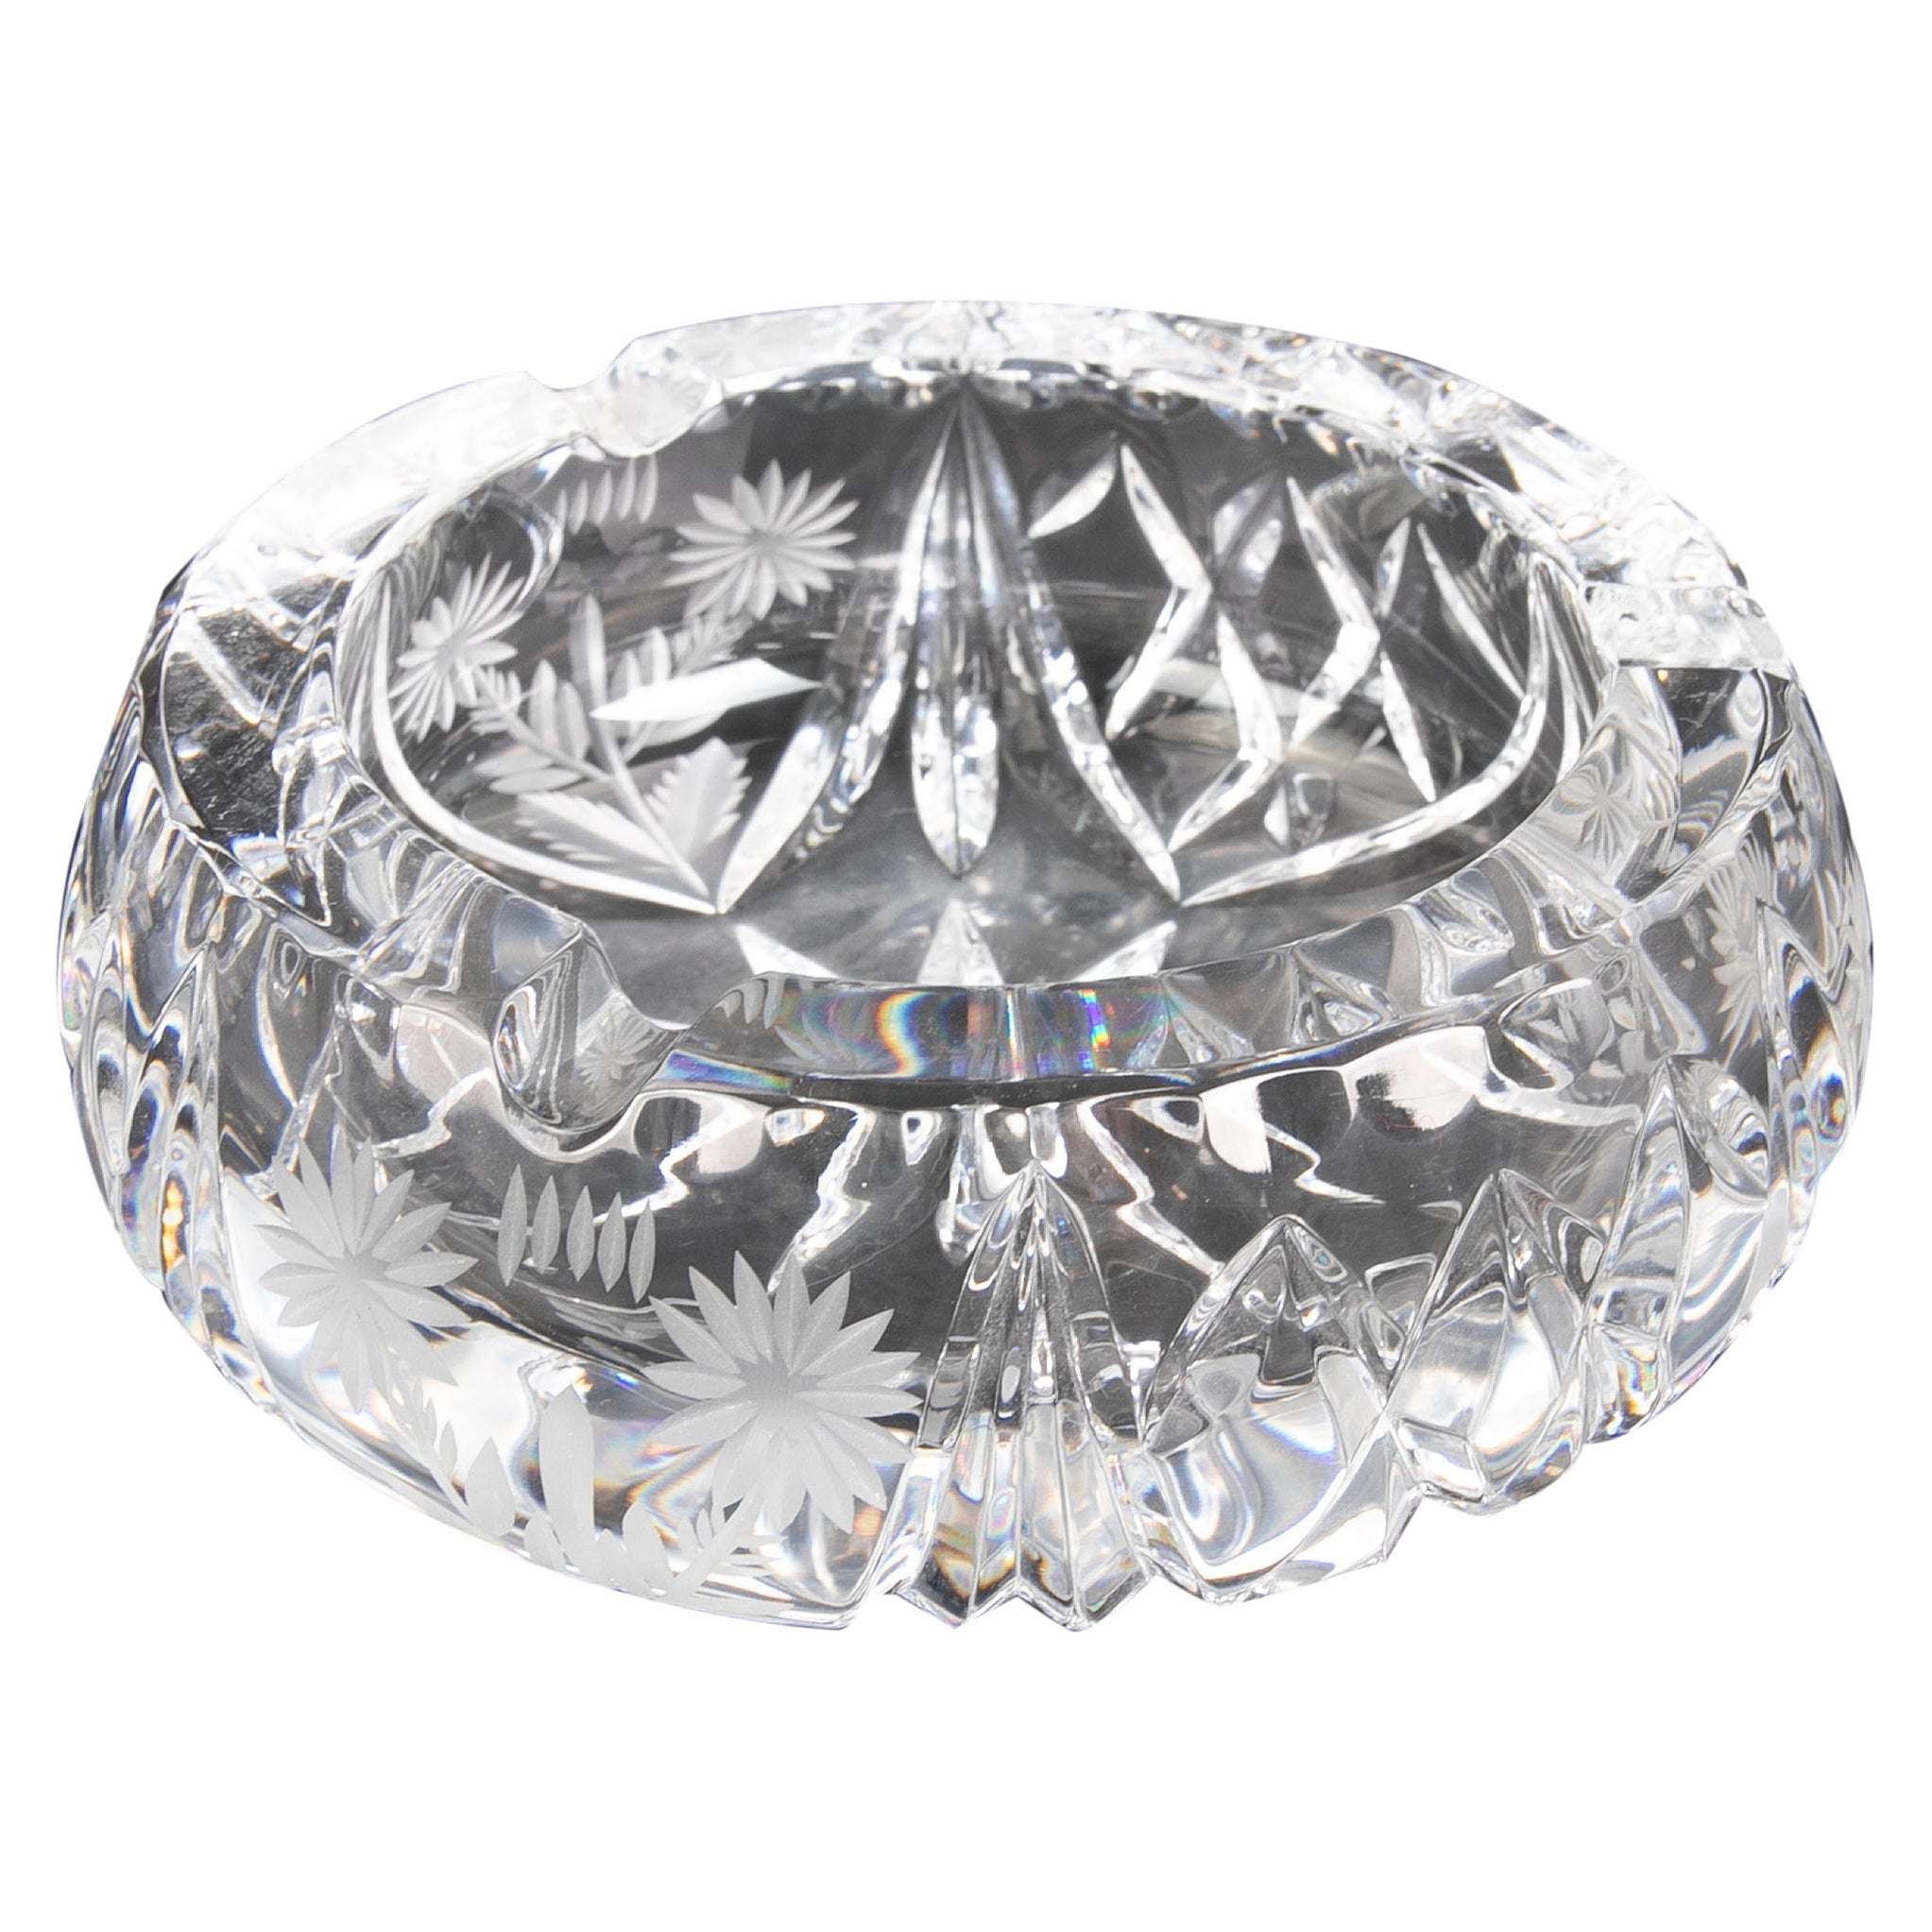 Solid Ashtray Made of Hand-Carved Crystal